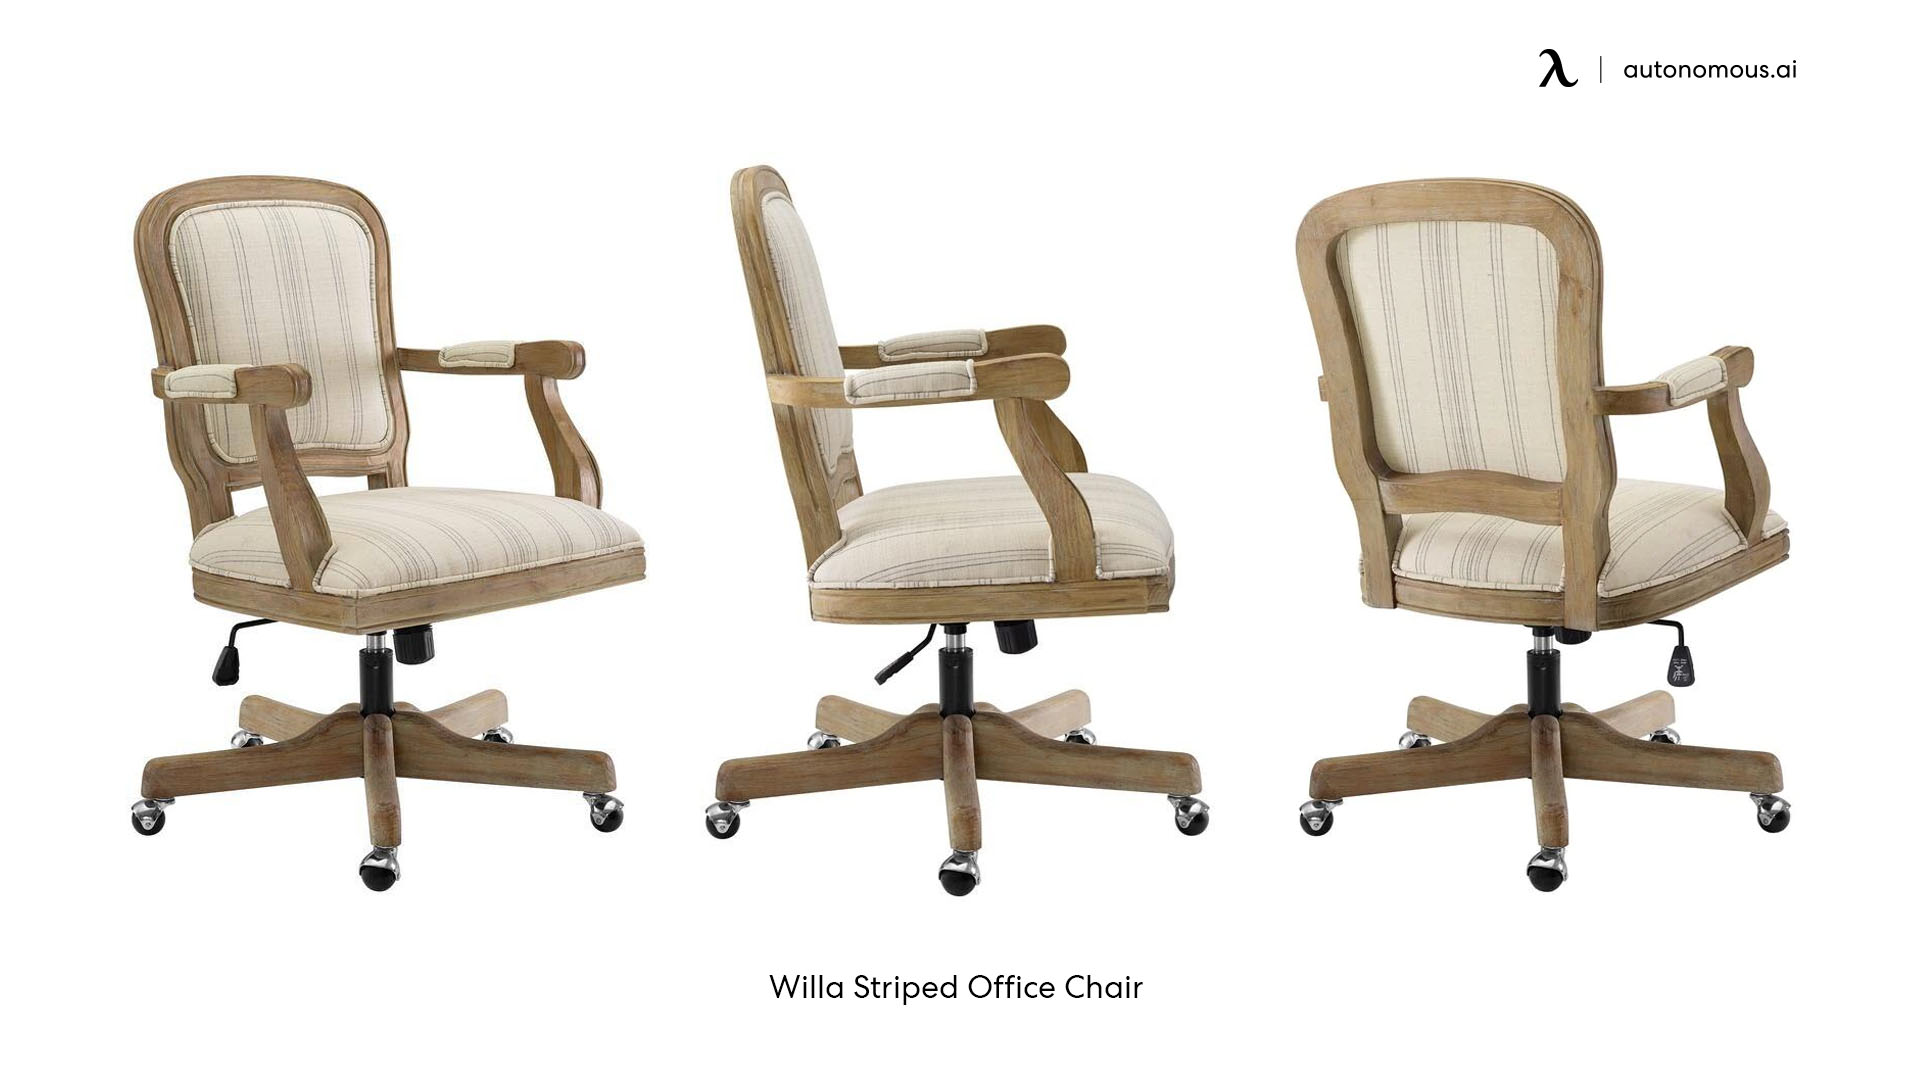 Willa Striped vintage office chair